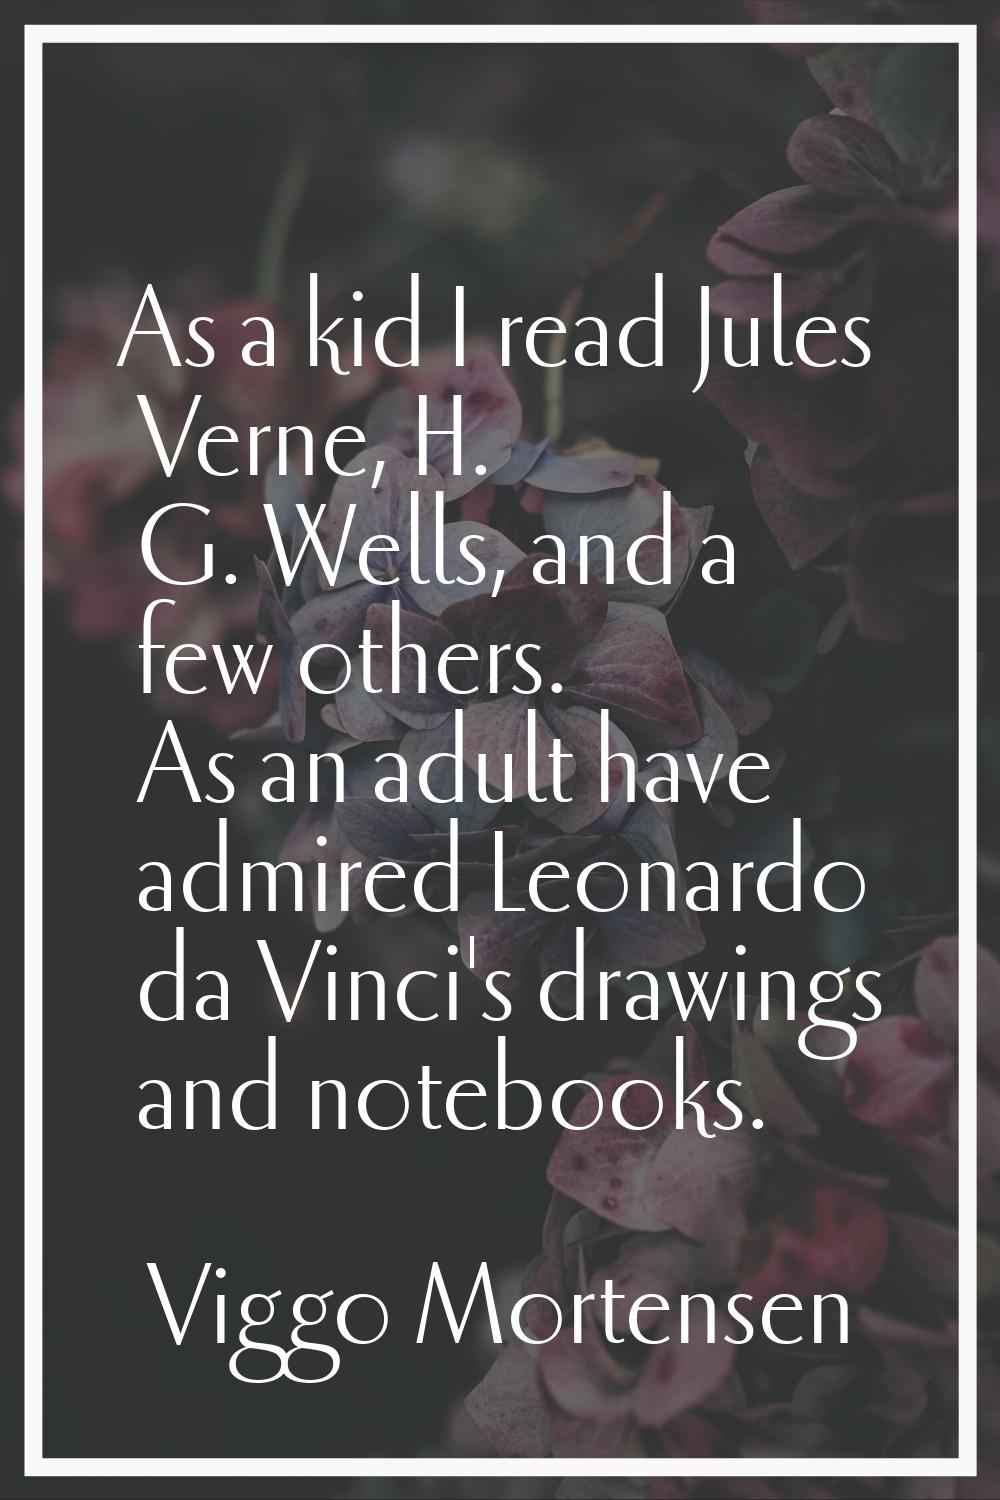 As a kid I read Jules Verne, H. G. Wells, and a few others. As an adult have admired Leonardo da Vi